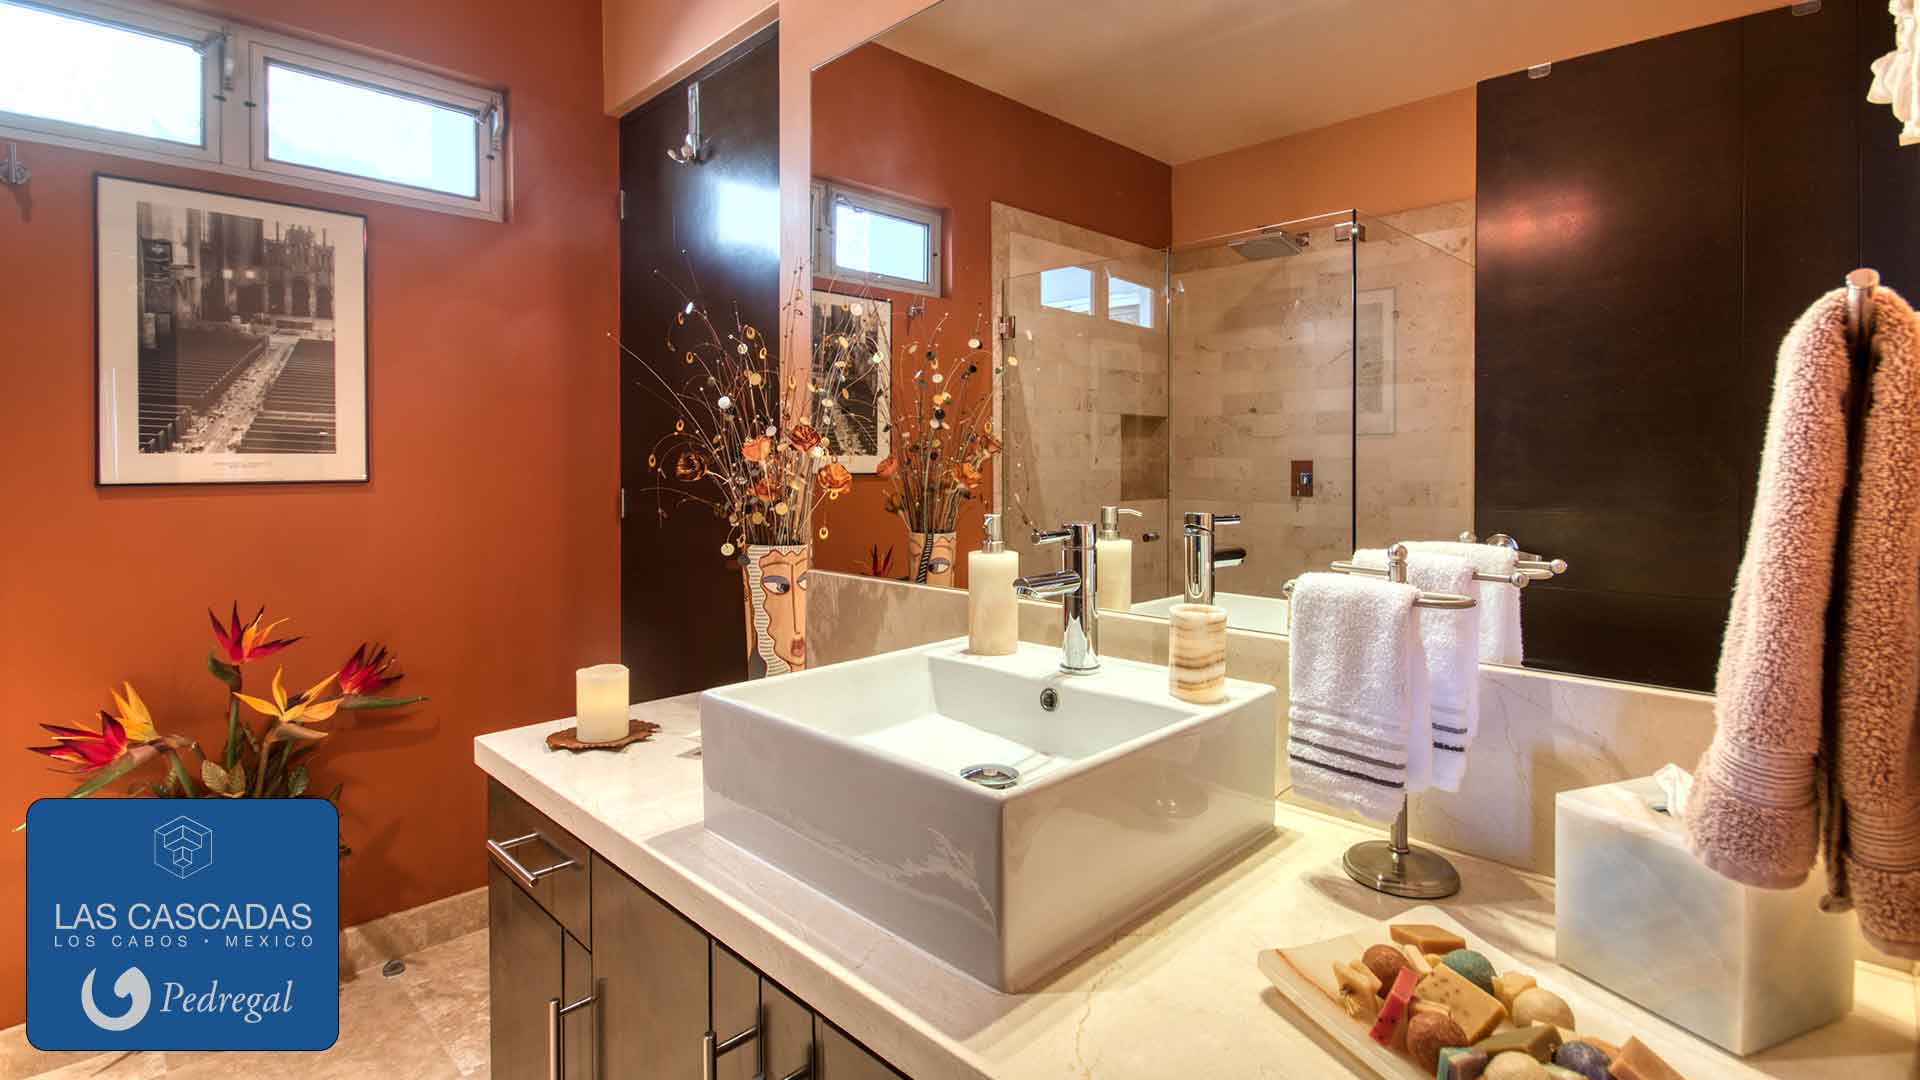 High-end finishes in bathrooms